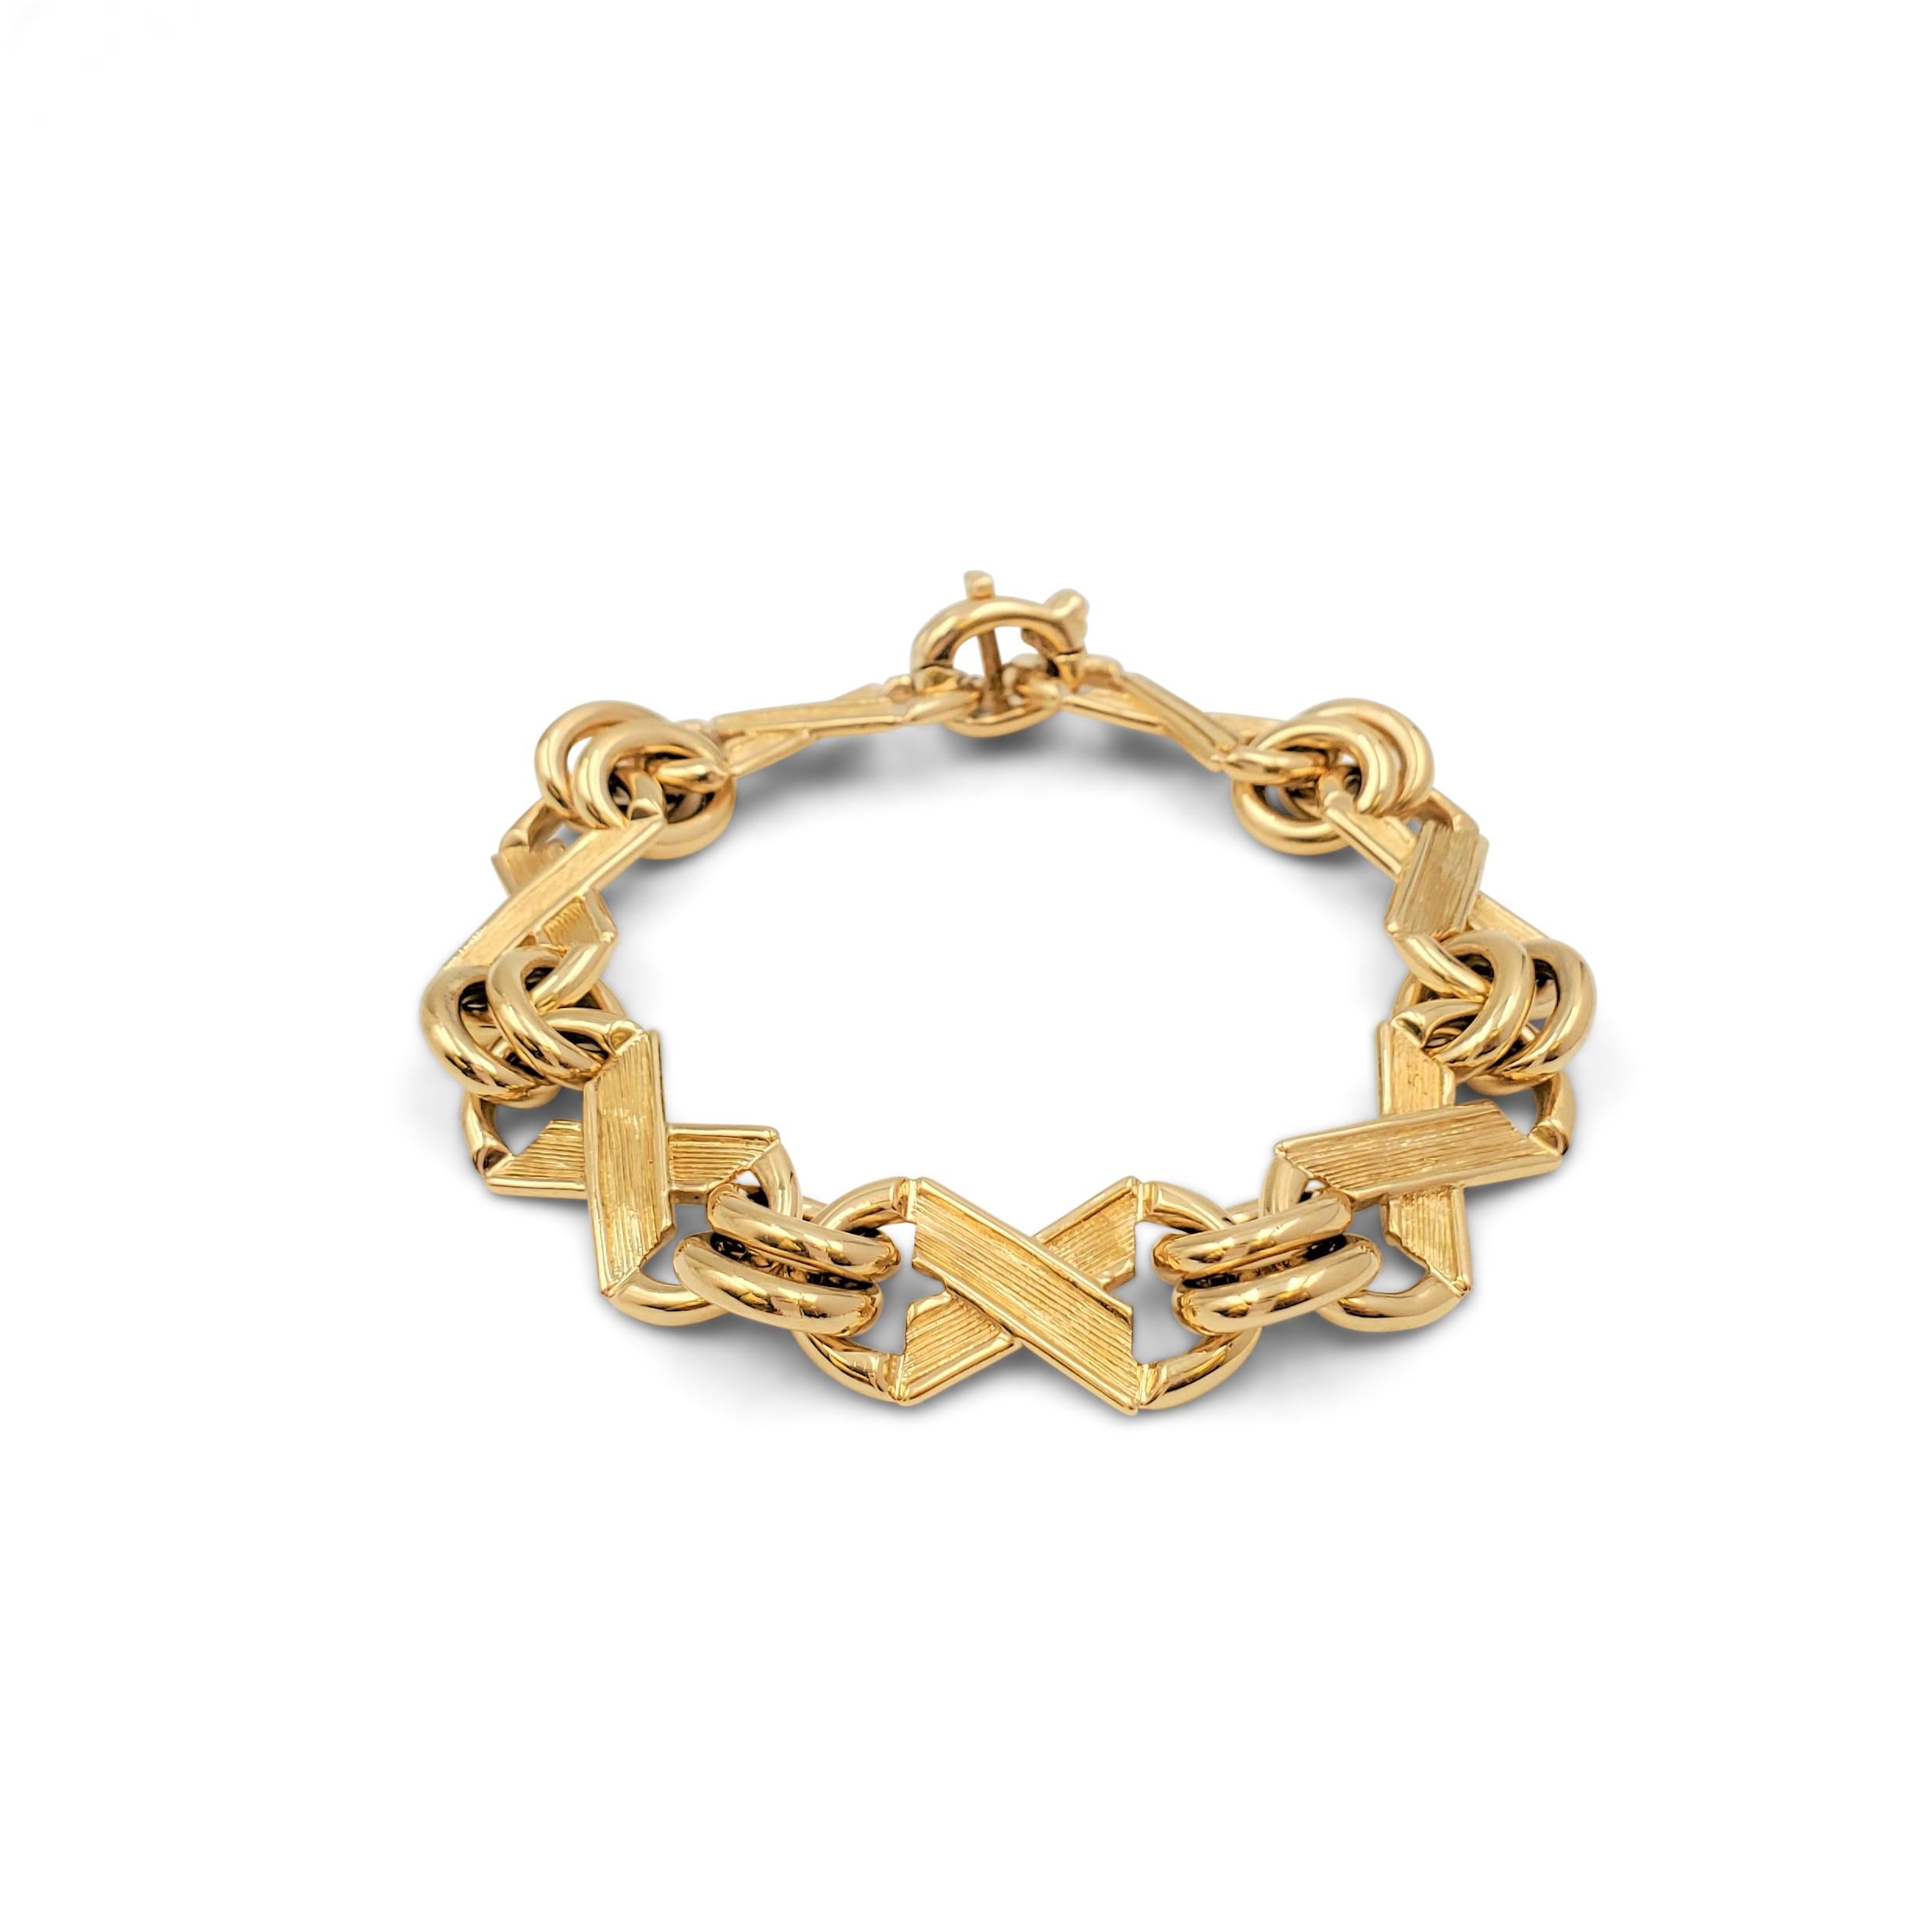 Authentic vintage Jean Schlumberger for Tiffany & Co. bracelet crafted in 18 karat yellow gold features a charming x and o motif created by textured links and smooth round connectors. Signed Tiffany & Co., Schlumberger, 750. The bracelet is not